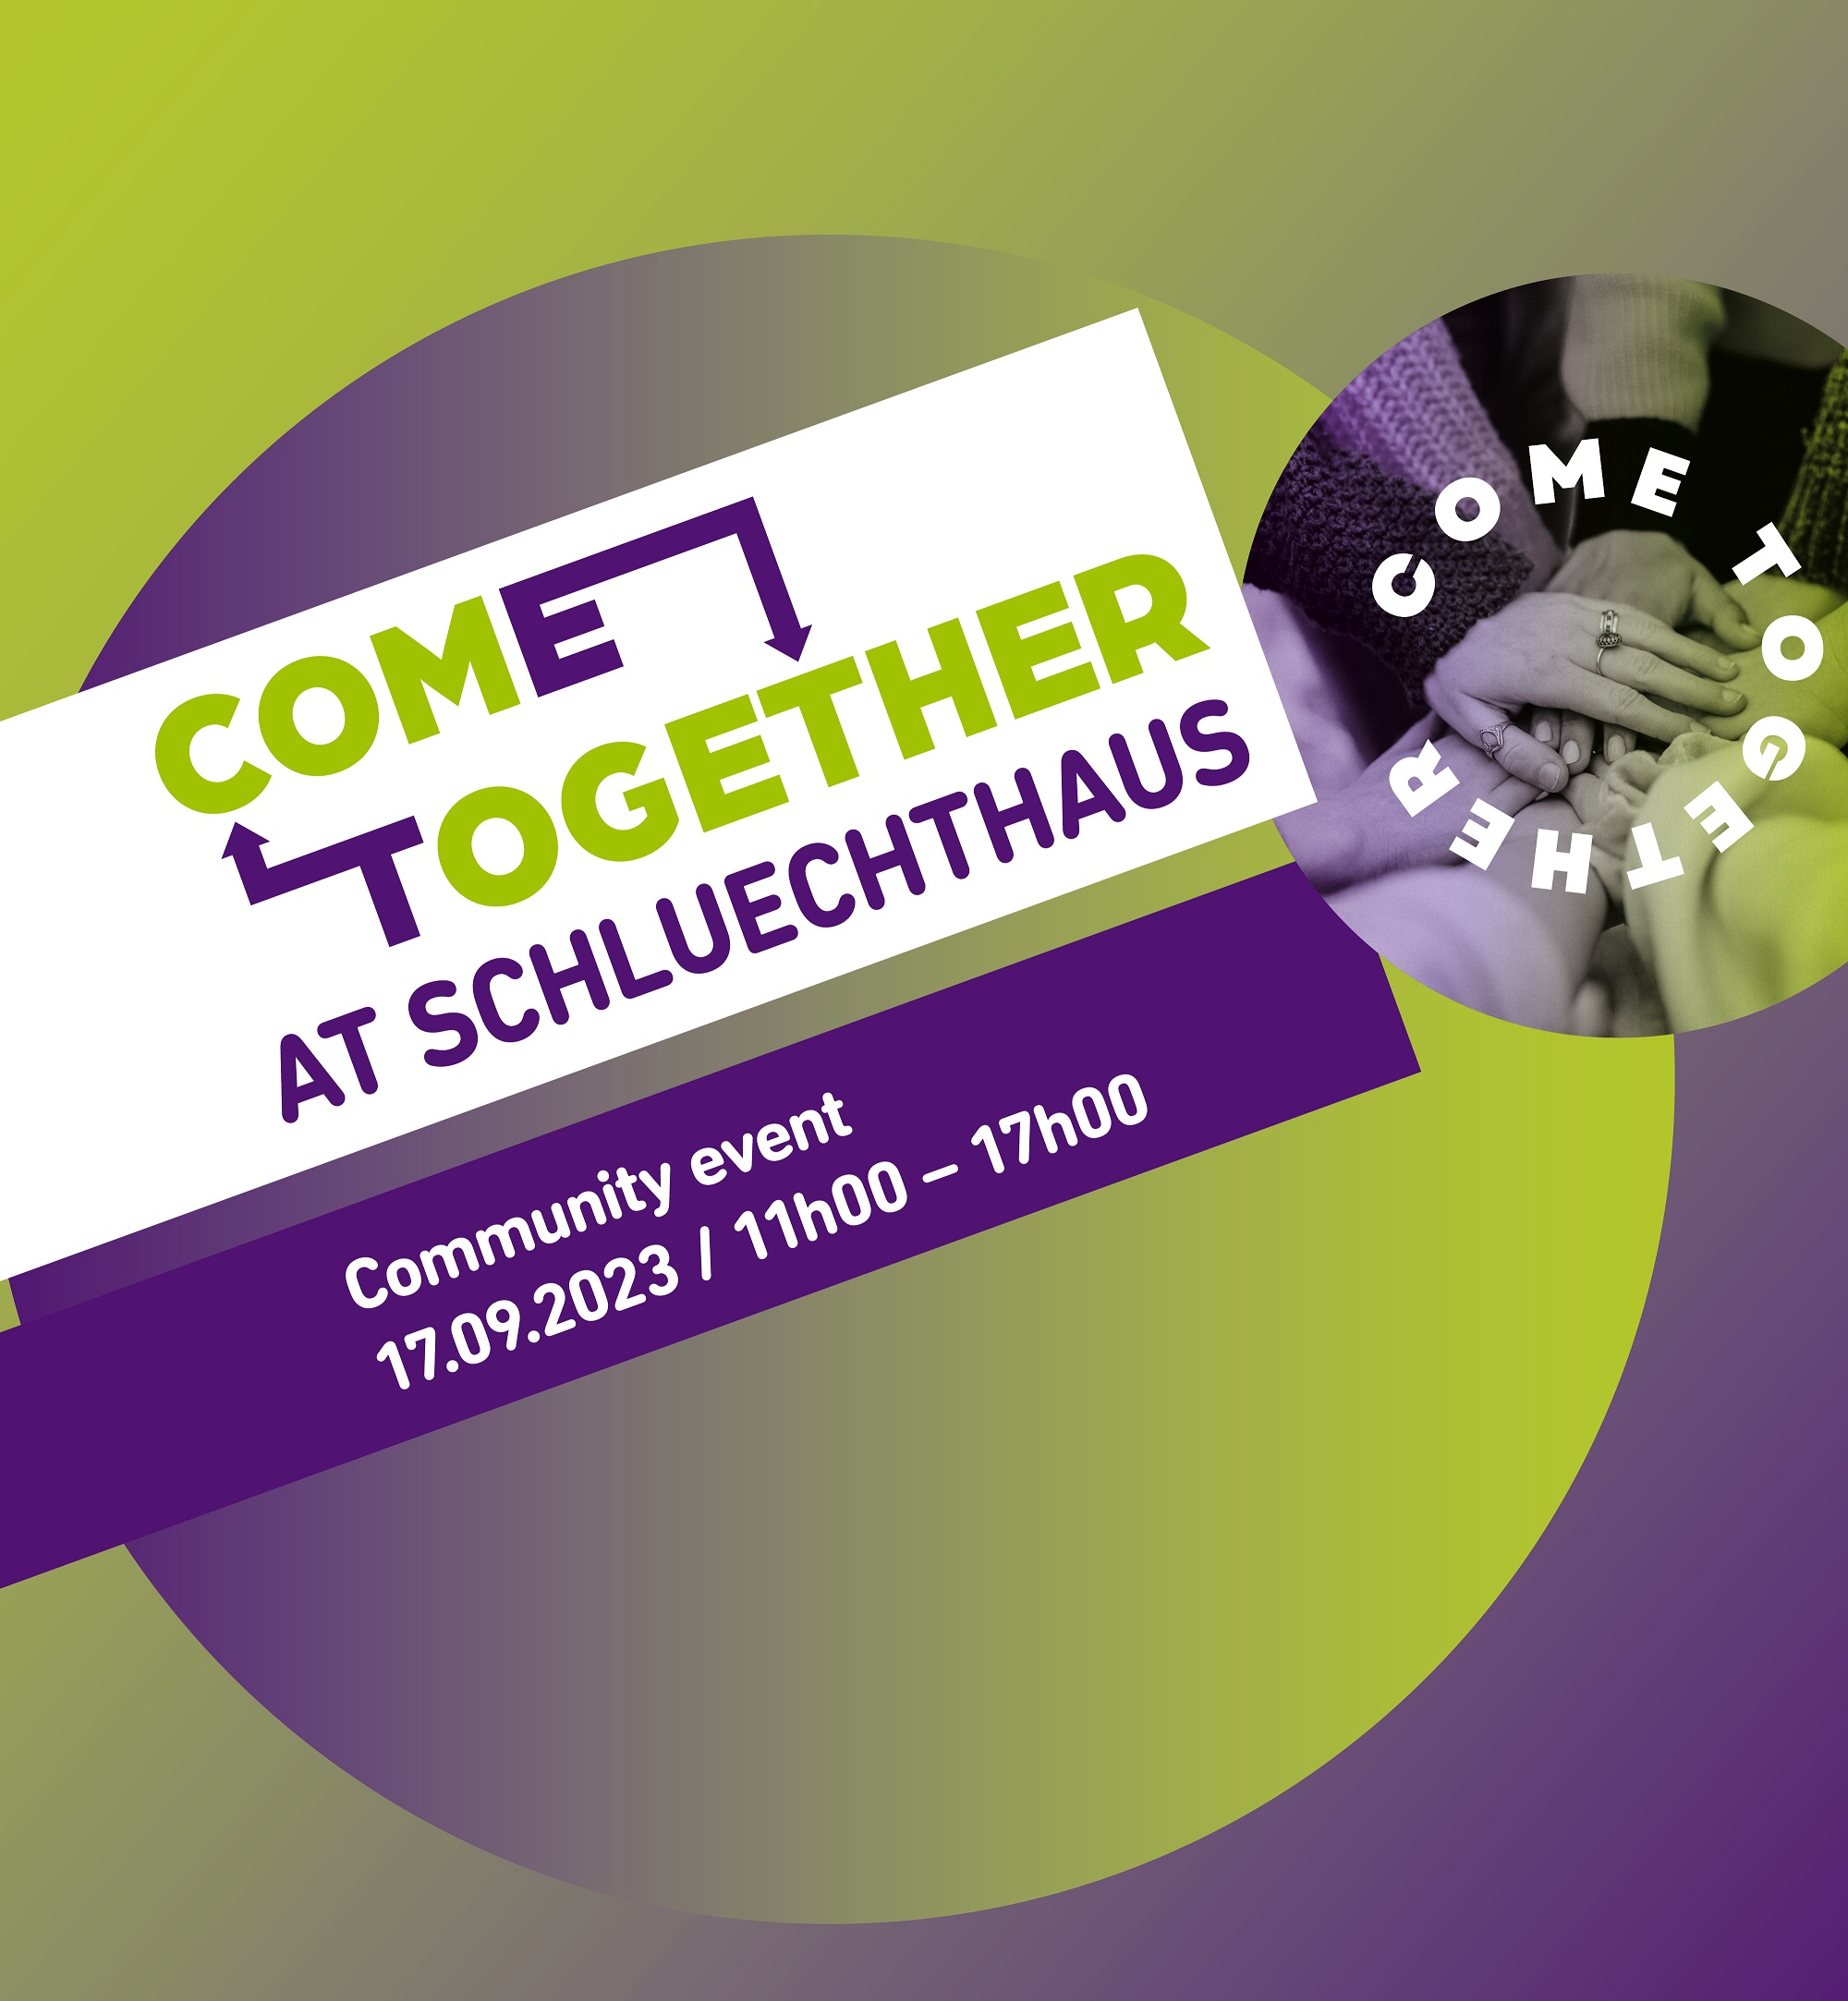 Come Together Welcome day